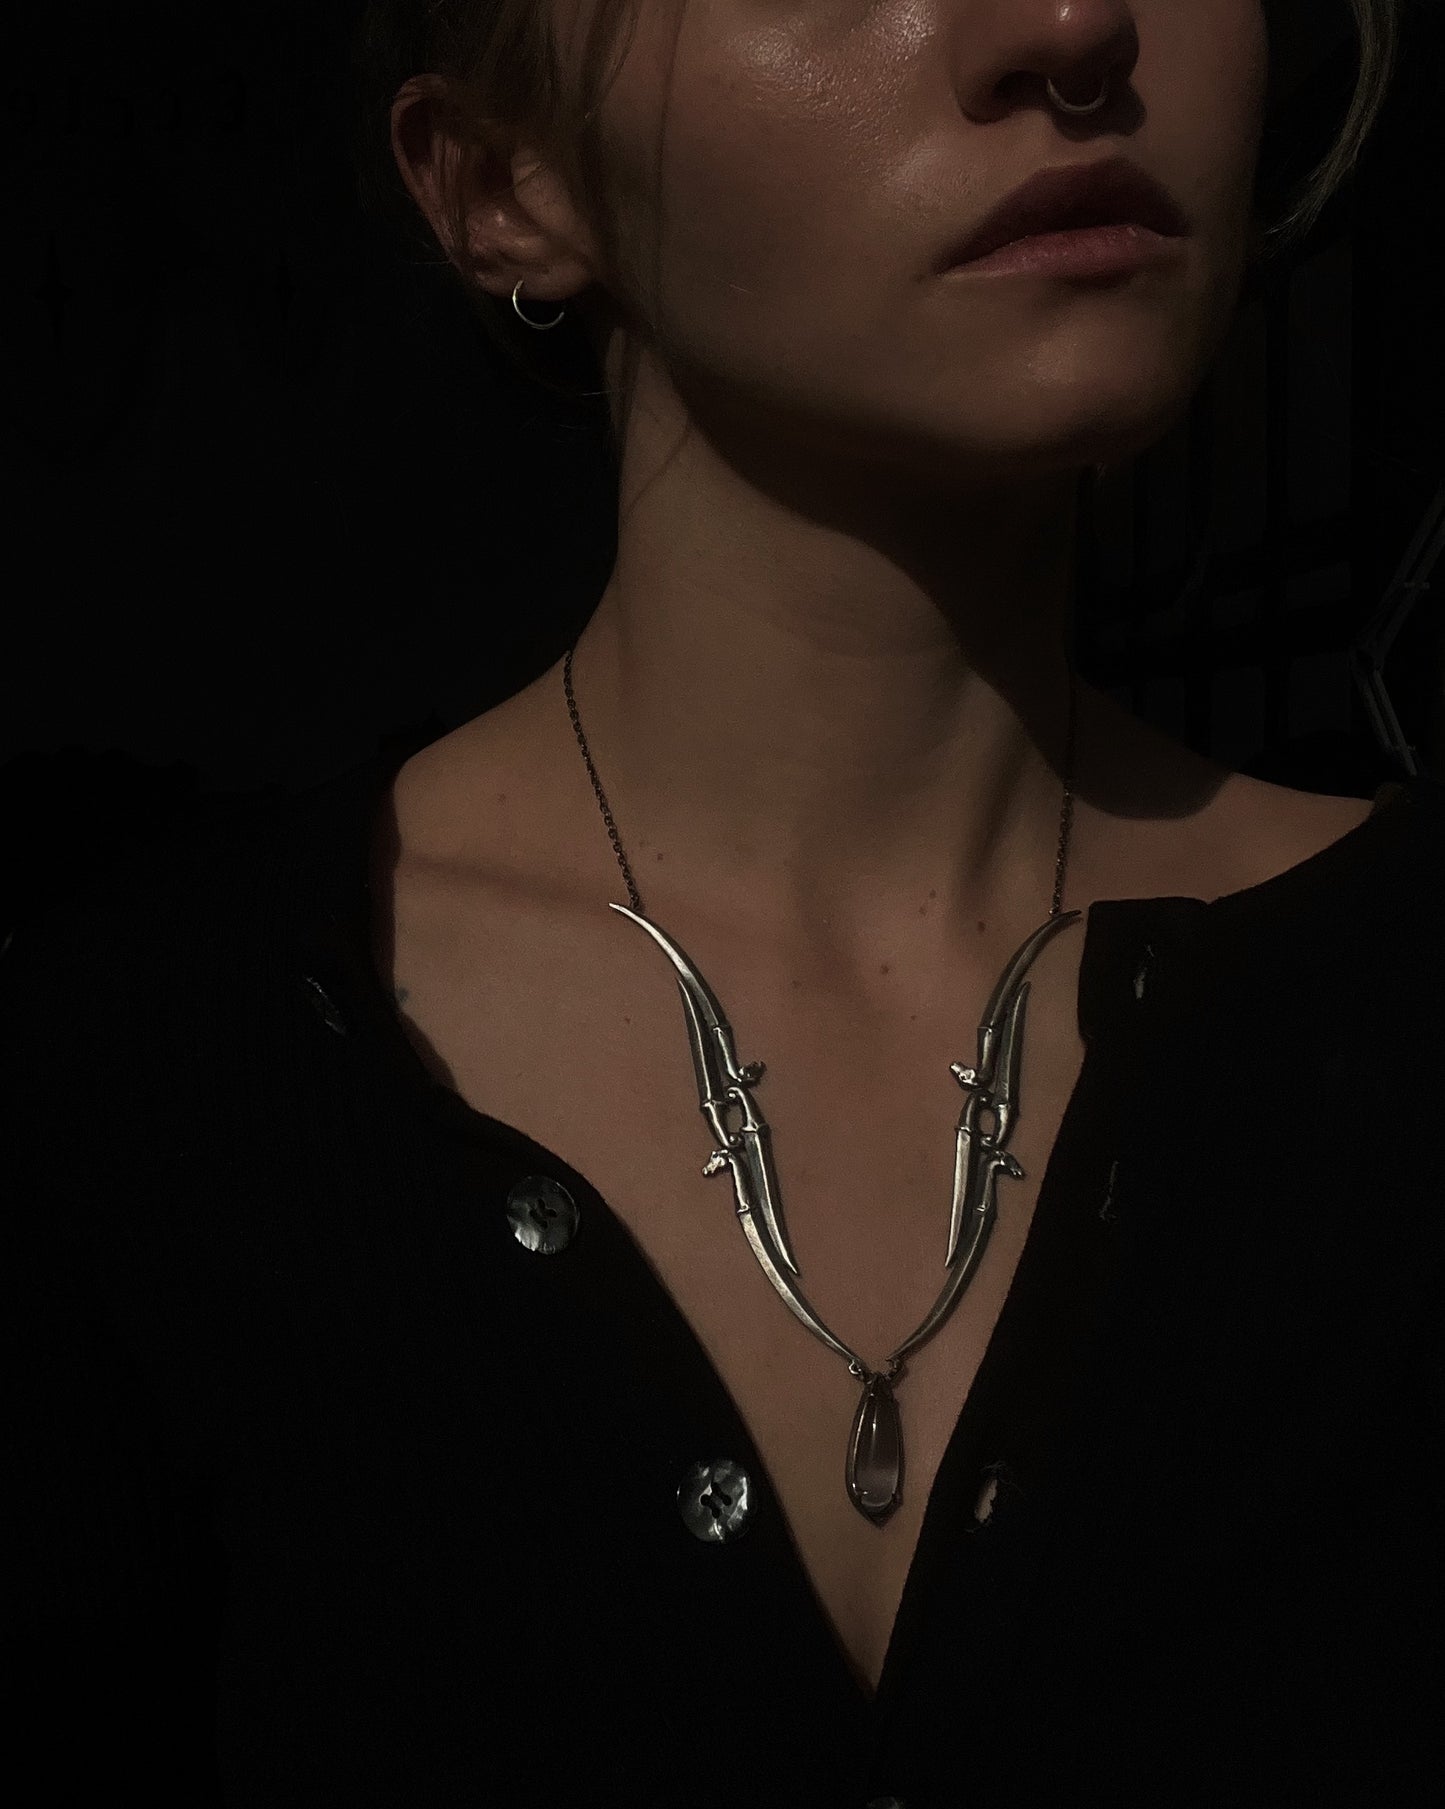 Ceremony ((The Fires)) // Limited Edition Necklace